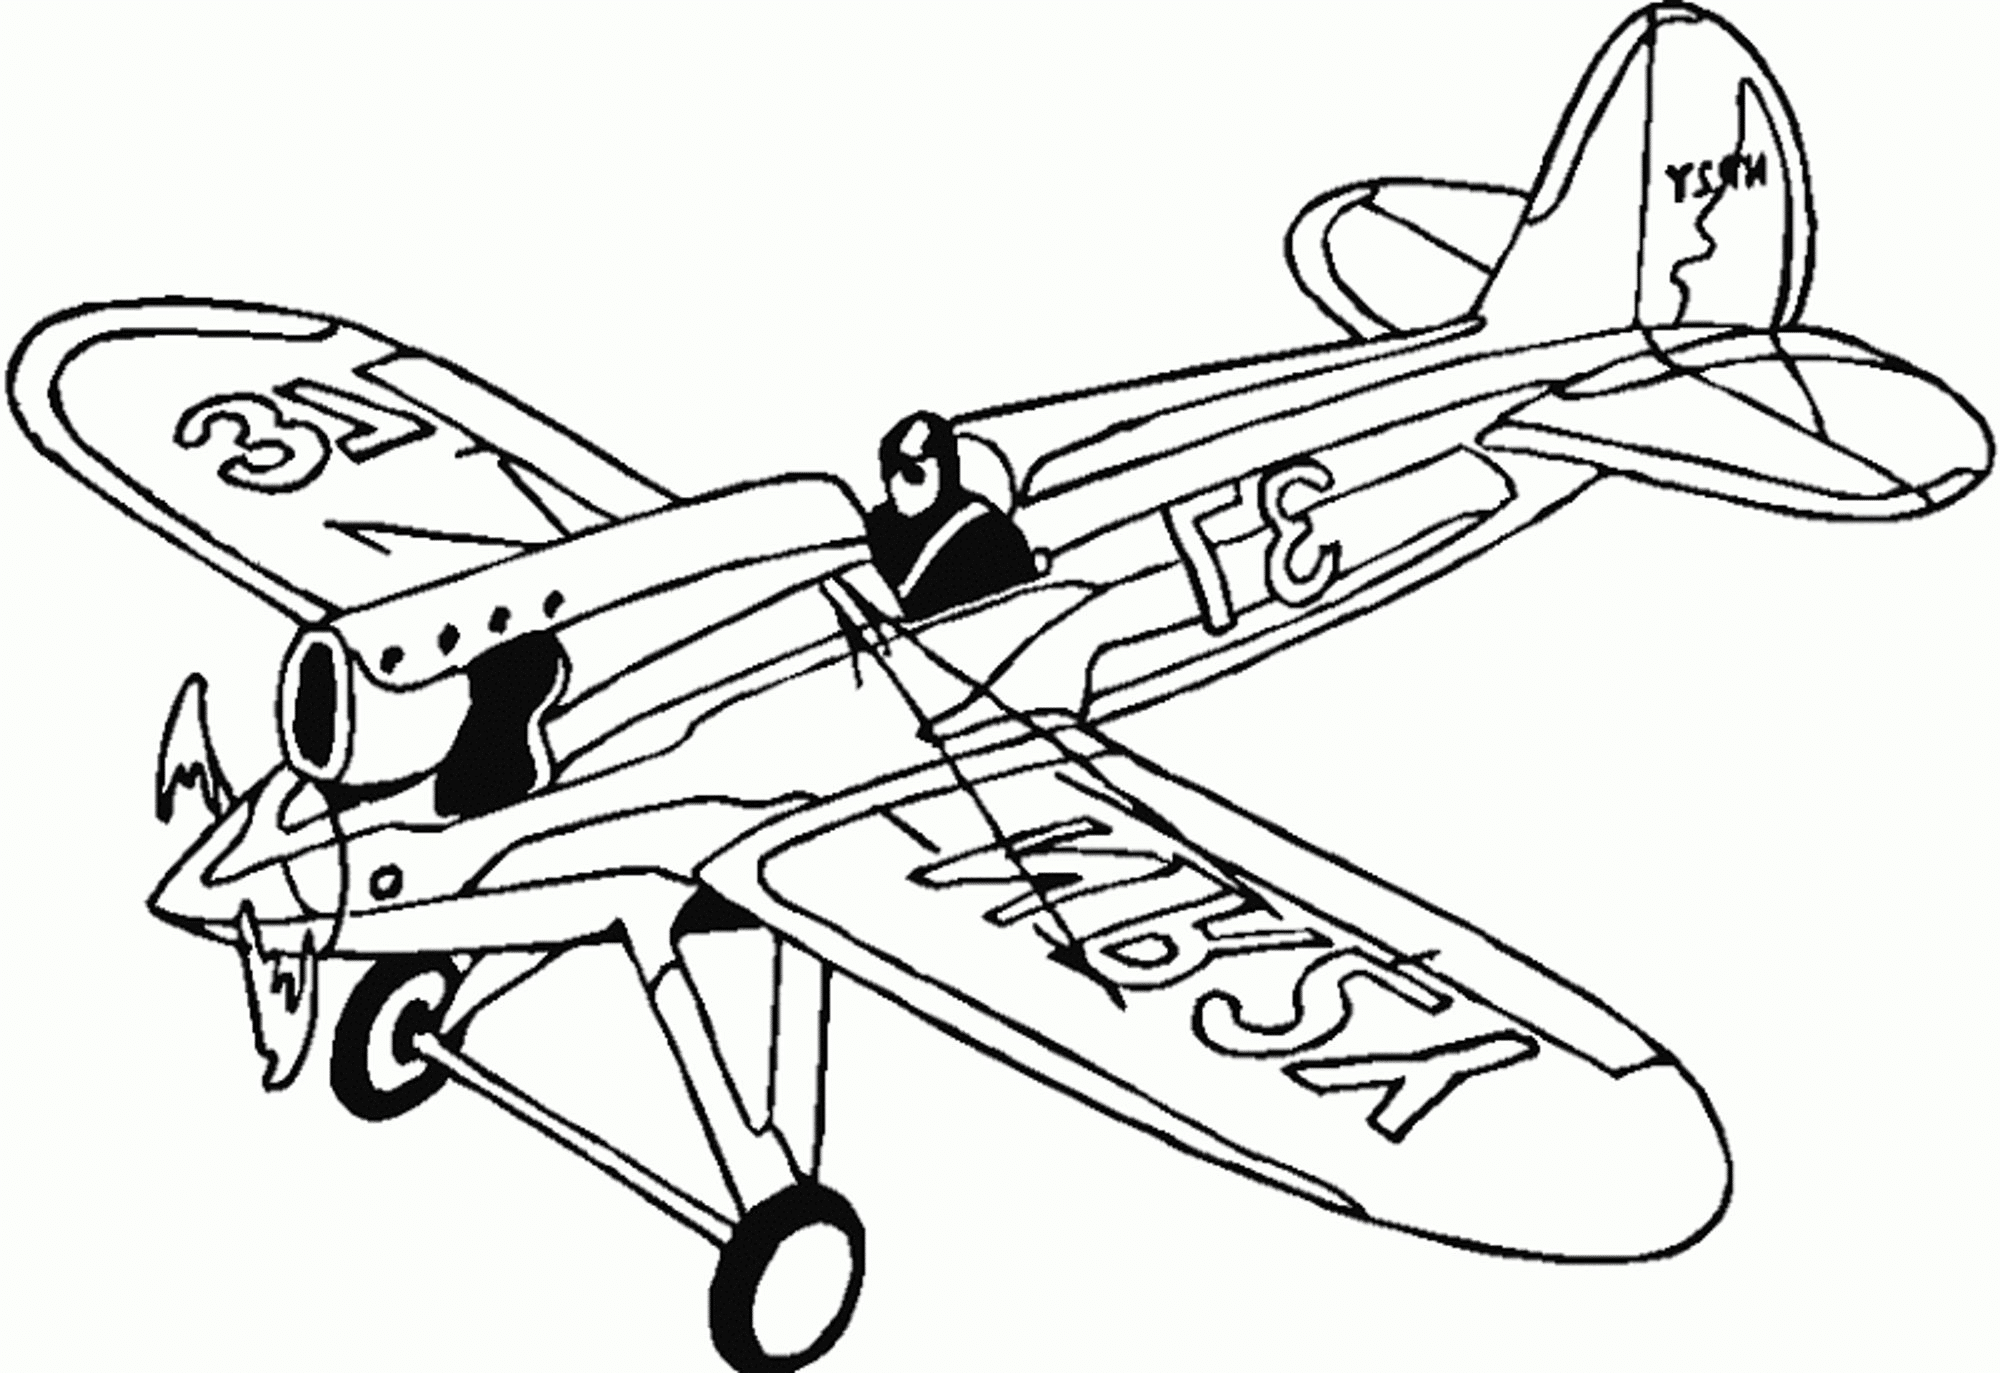 world-war-2-airplane-coloring-pages | | BestAppsForKids.com